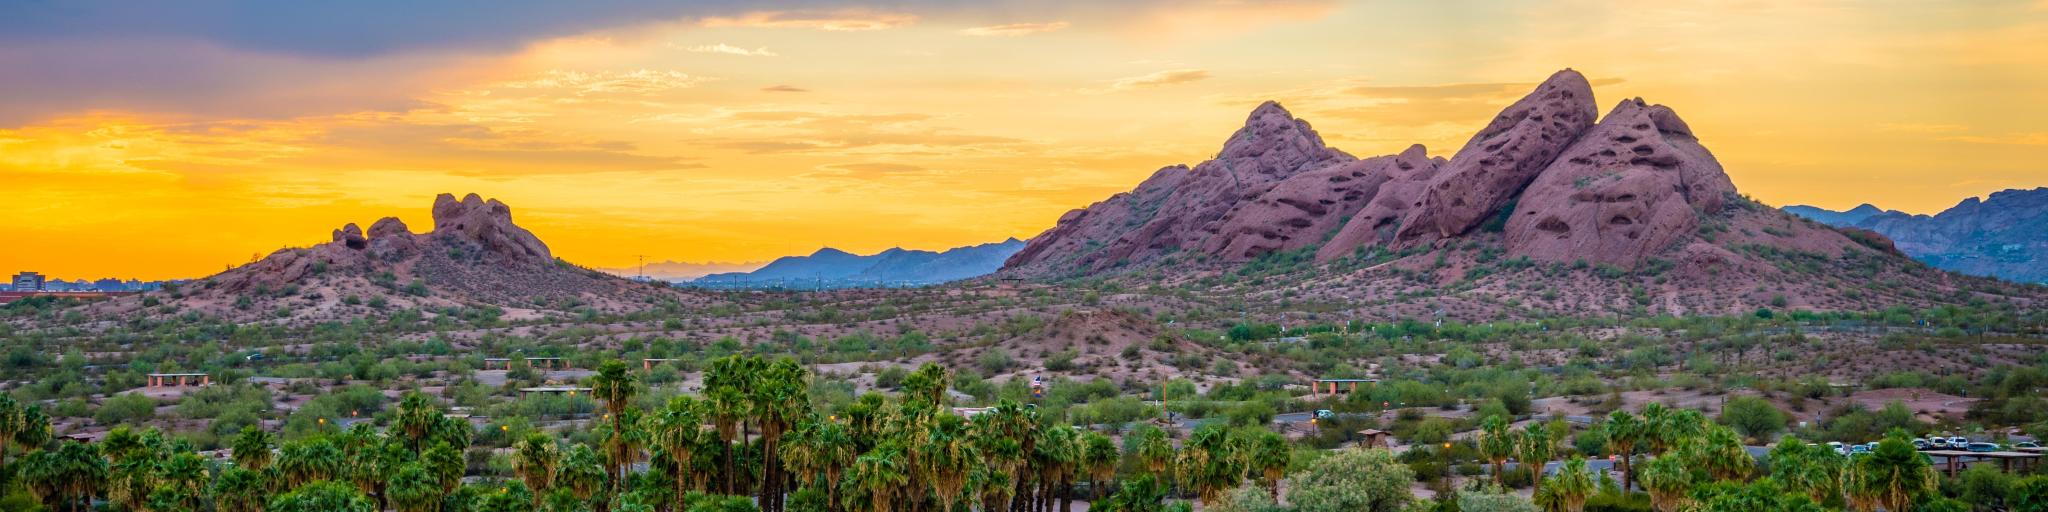 Papago Park, Phoenix, Arizona, USA after sunset with hills in the distance and desert landscape in the foreground.